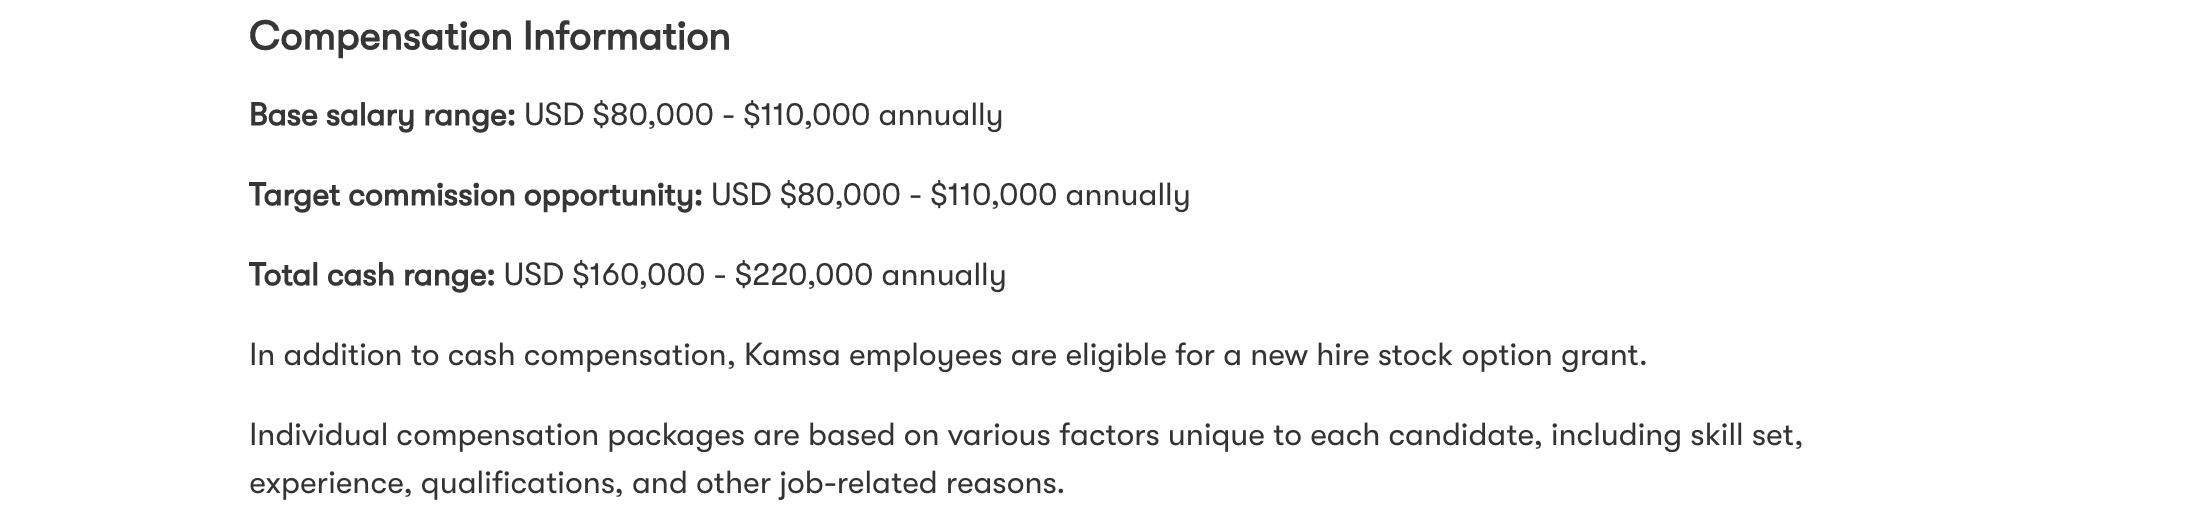 Example of salary ranges within a job posting. "Compensation Information, Base salary range, target commission opportunity, total cash range. In addition to cash compensation, Kamsa employees are eligible for a new hire stock option grant. Individual compensation packages are based on various factors unique to each candidate, including skill set, experience, qualifications, and other job-related reasons."